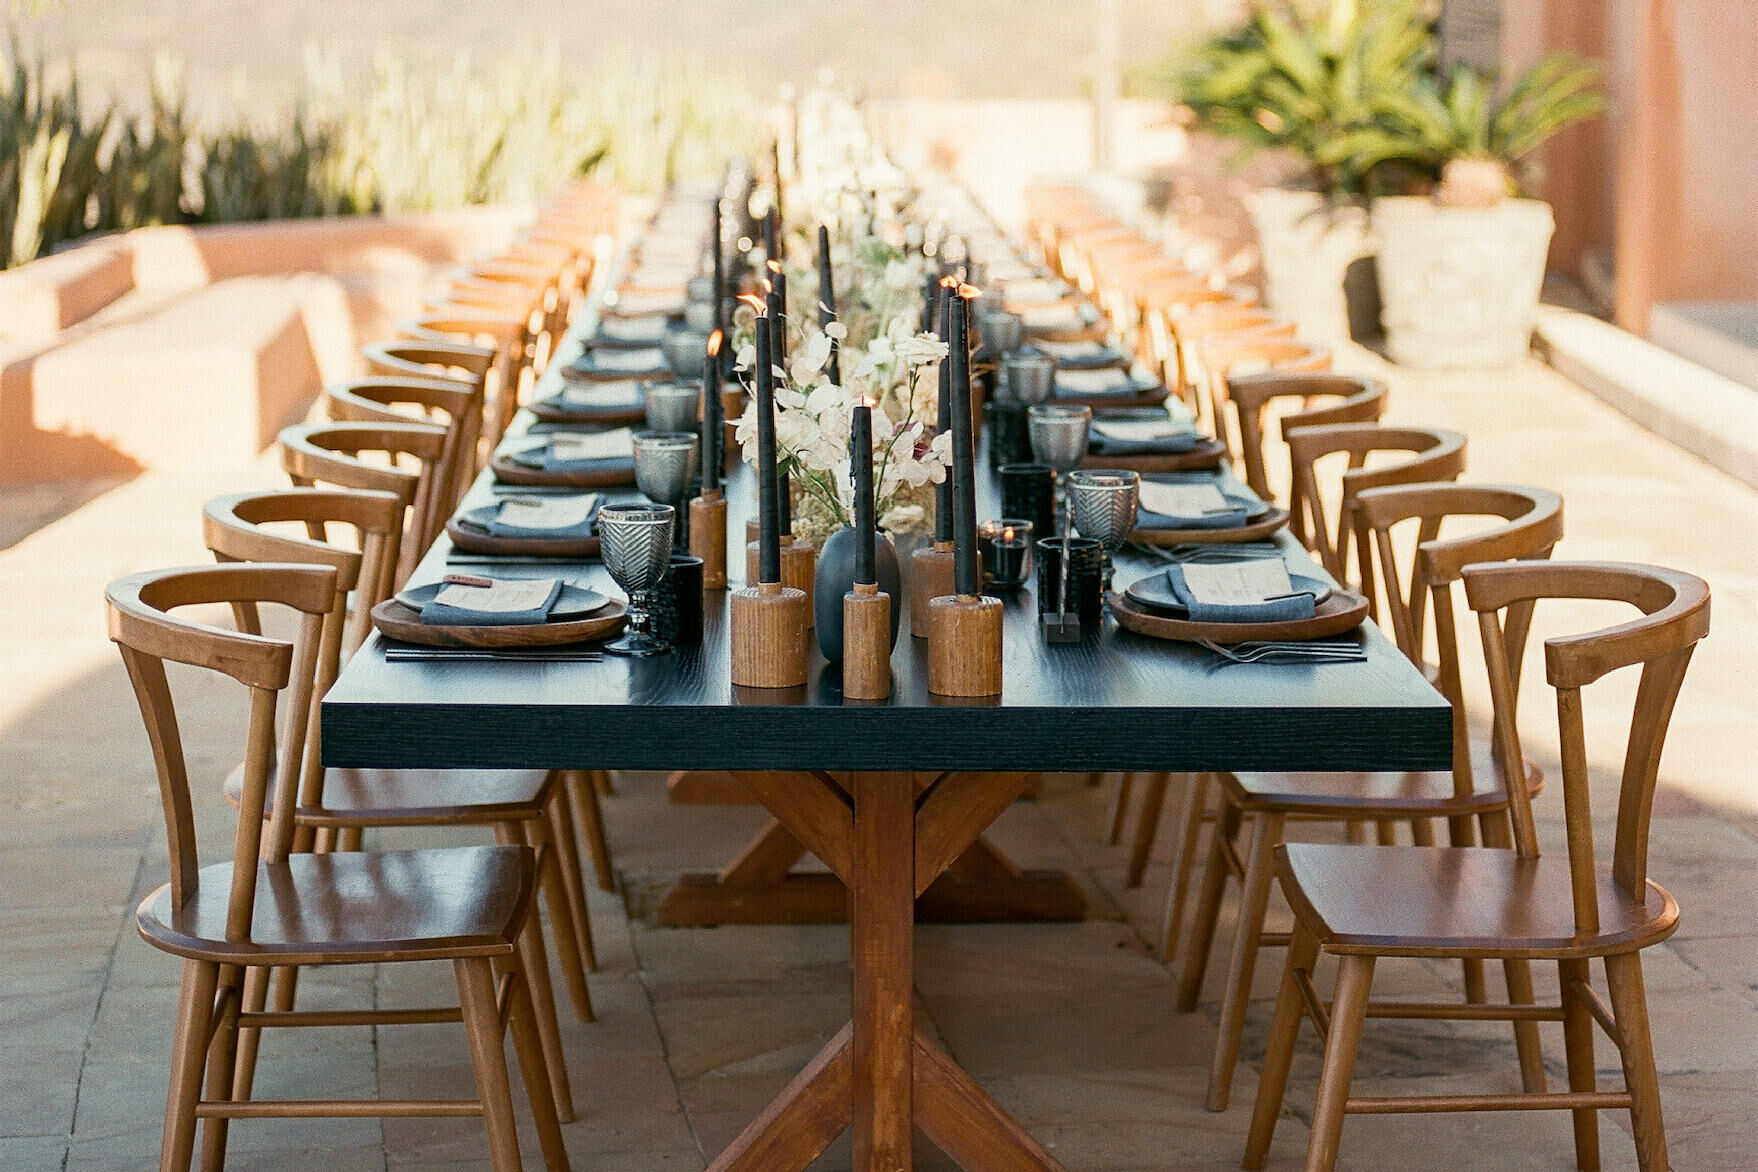 One long table for all of the guests at an intimate wedding reception, set with modern wood chairs, black taper candles, and handsome tabletop rentals.